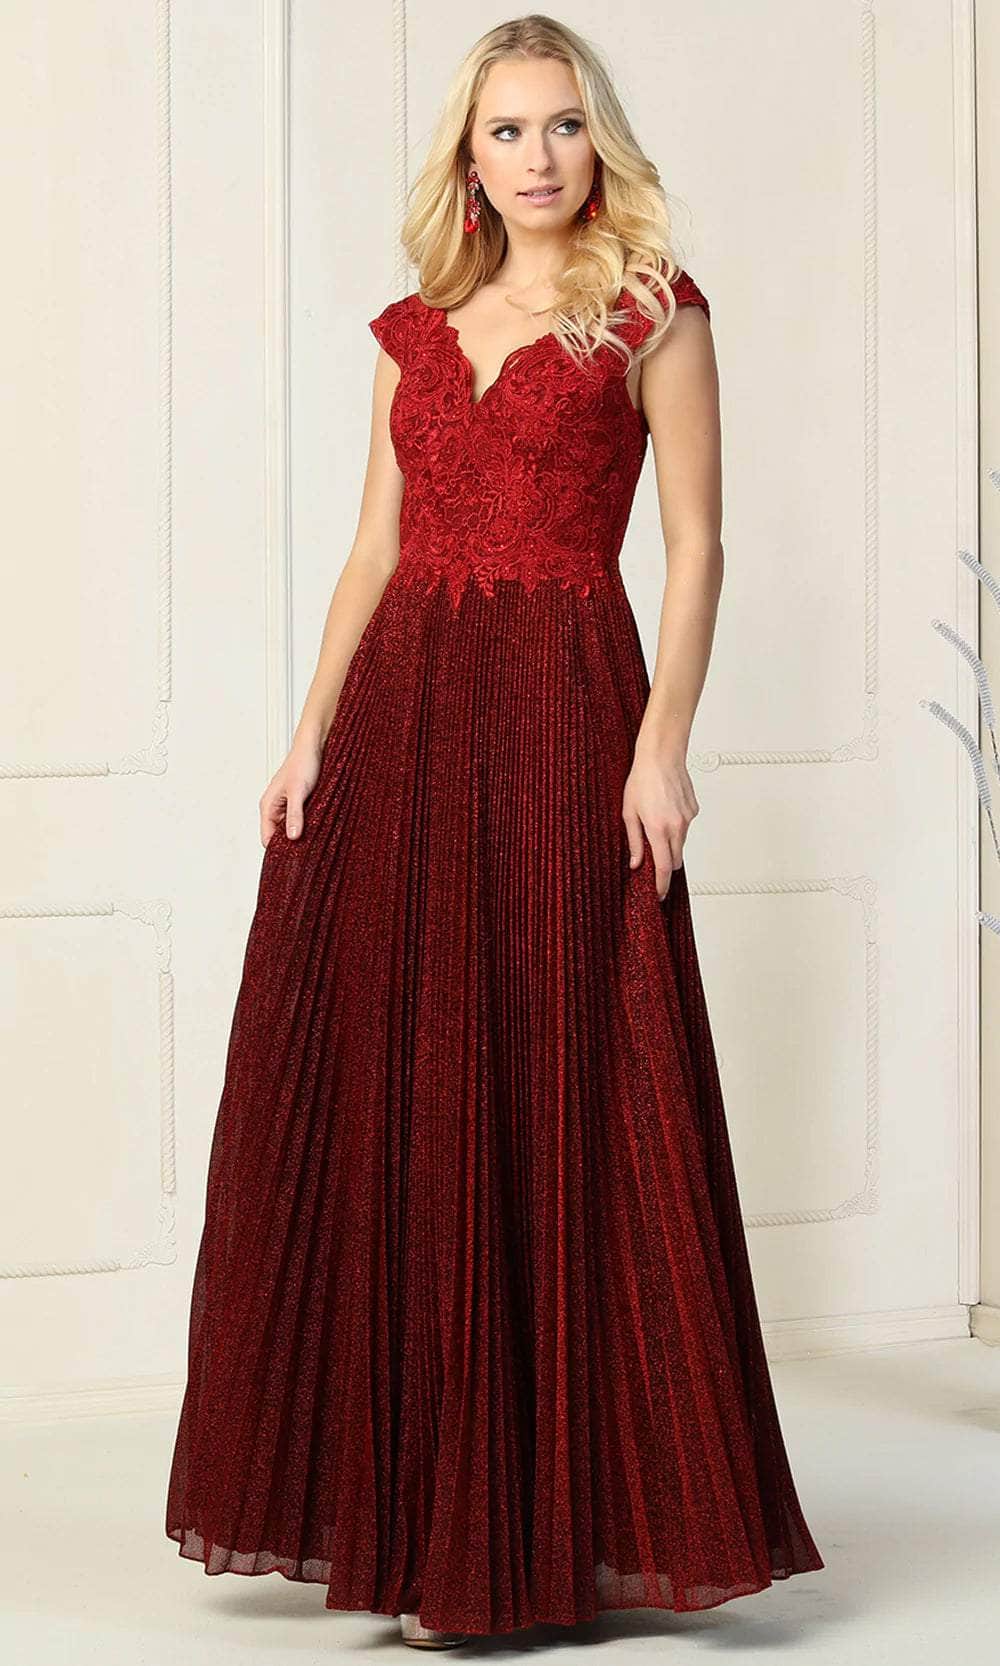 May Queen MQ1836 - Accordion Pleated Skirt Formal Gown Evening Dresses 6 / Burgundy